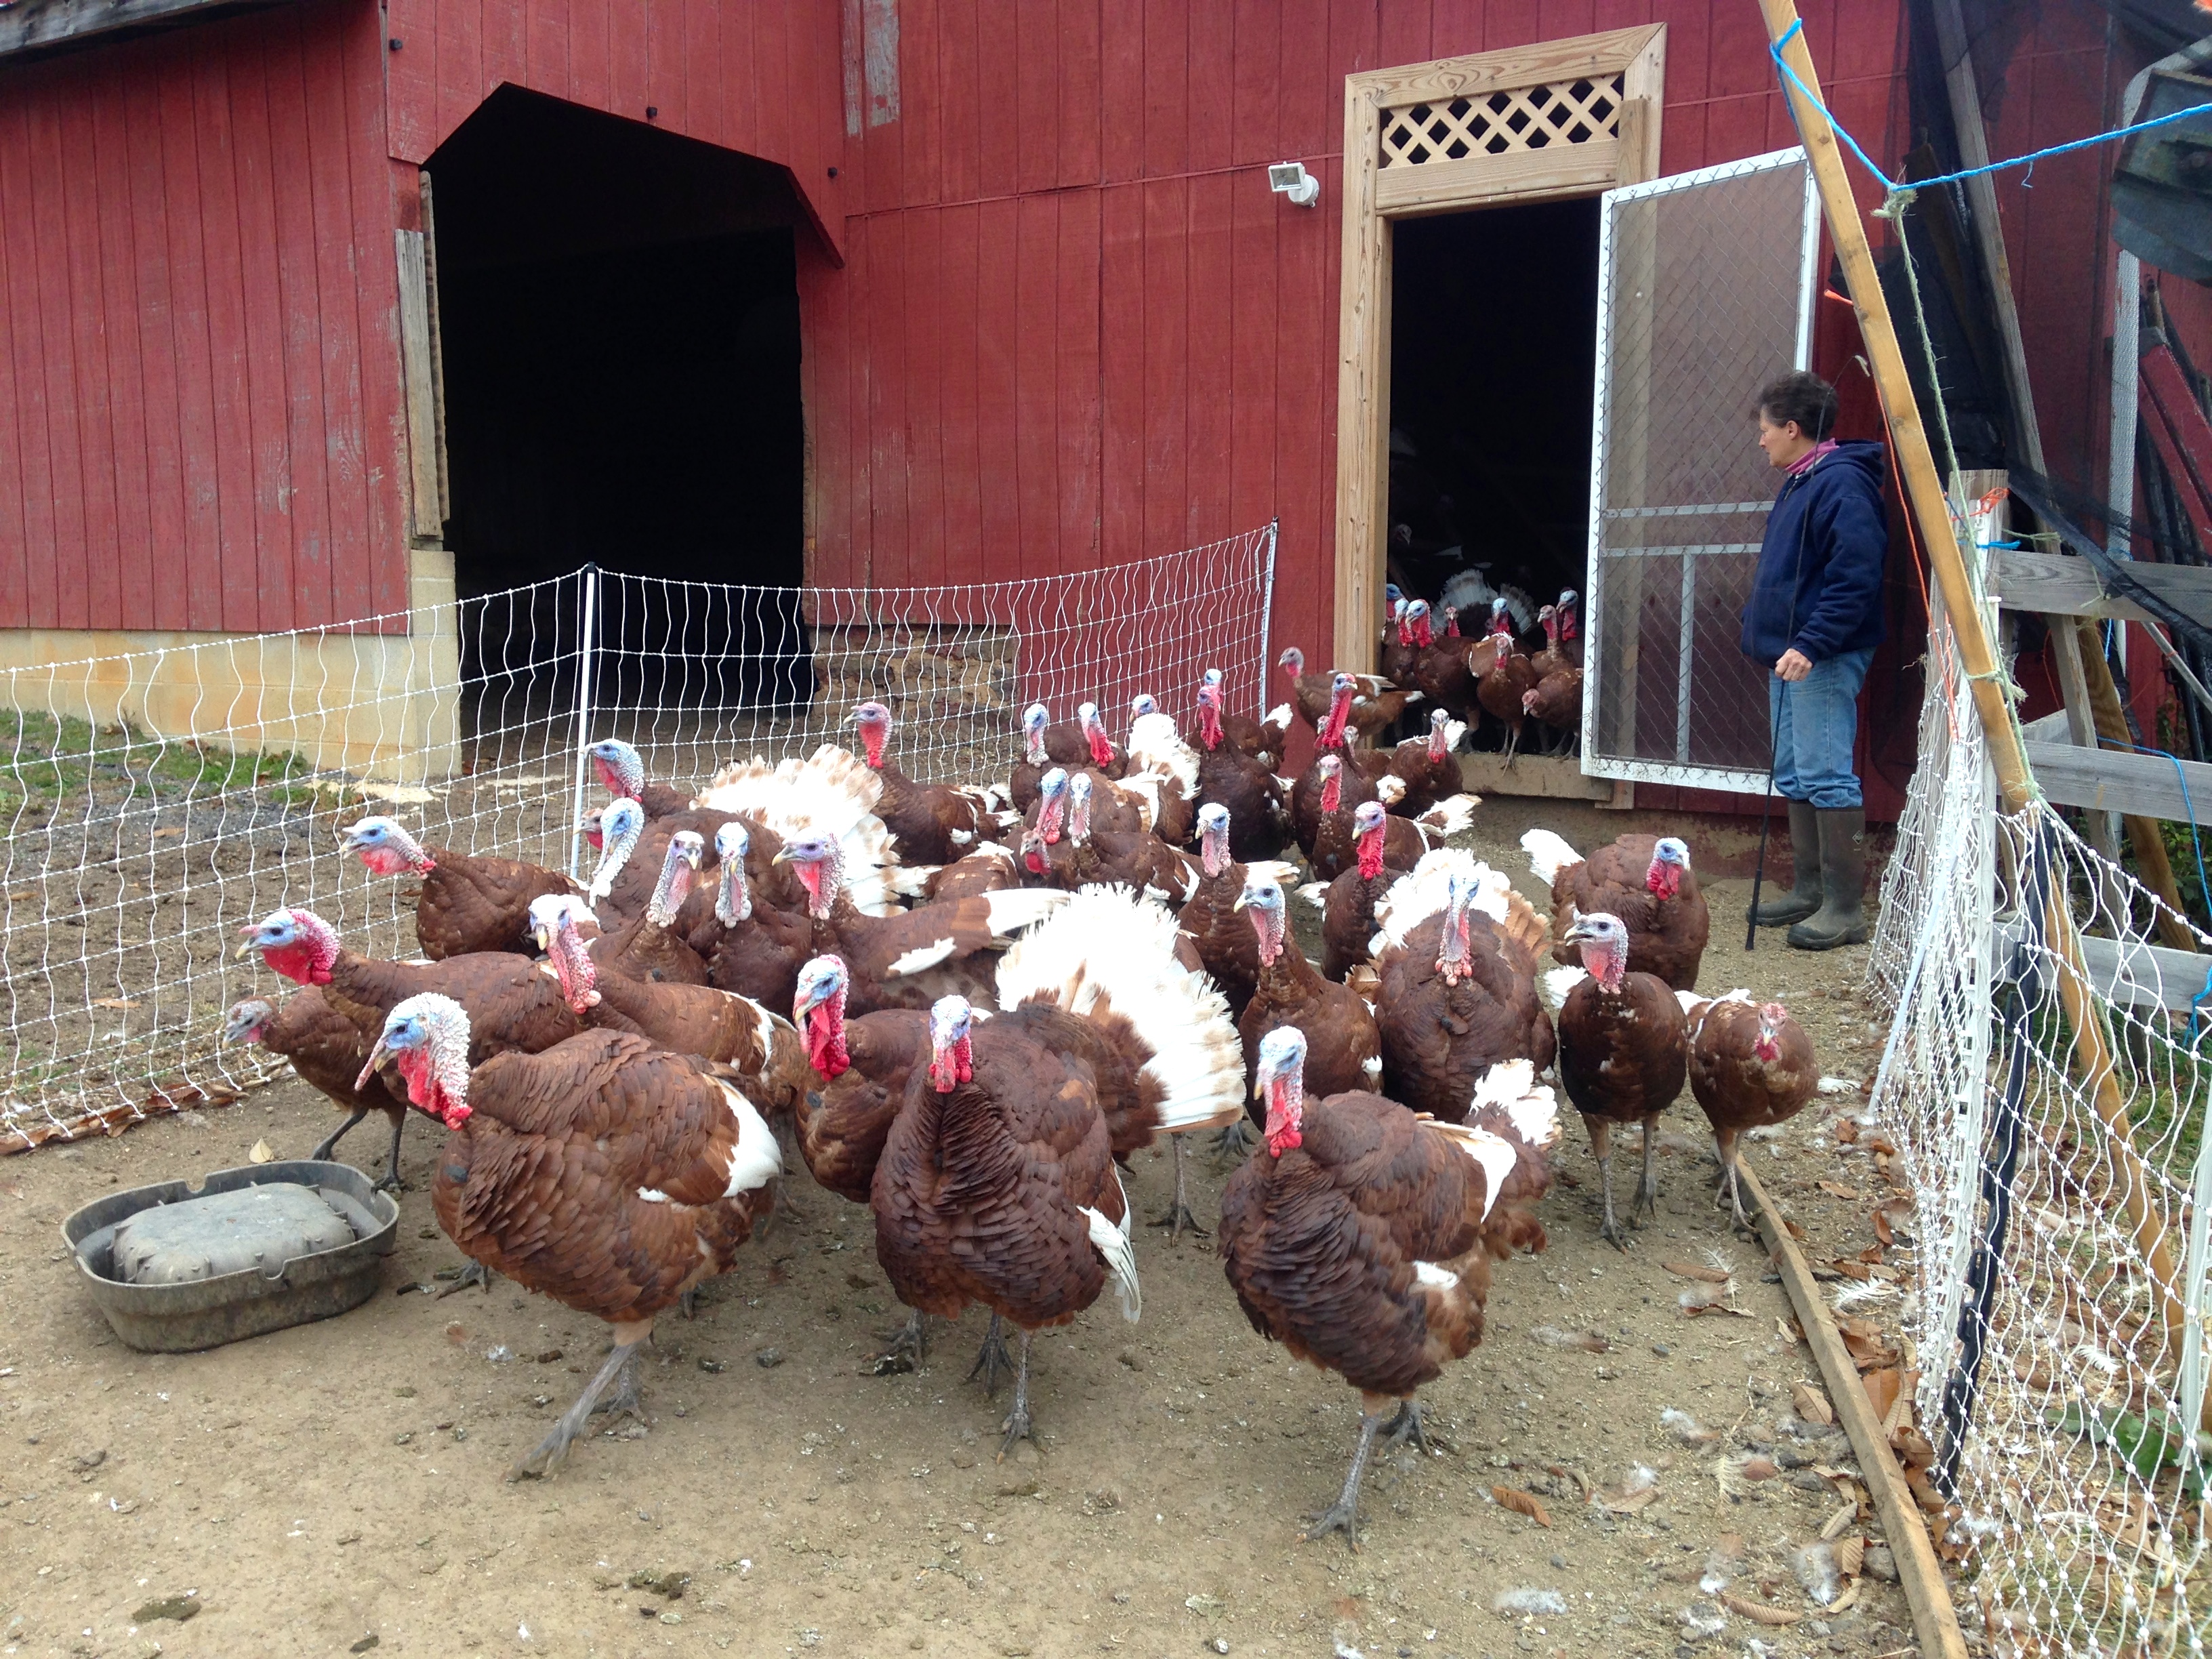 Turkeys come out of the barn